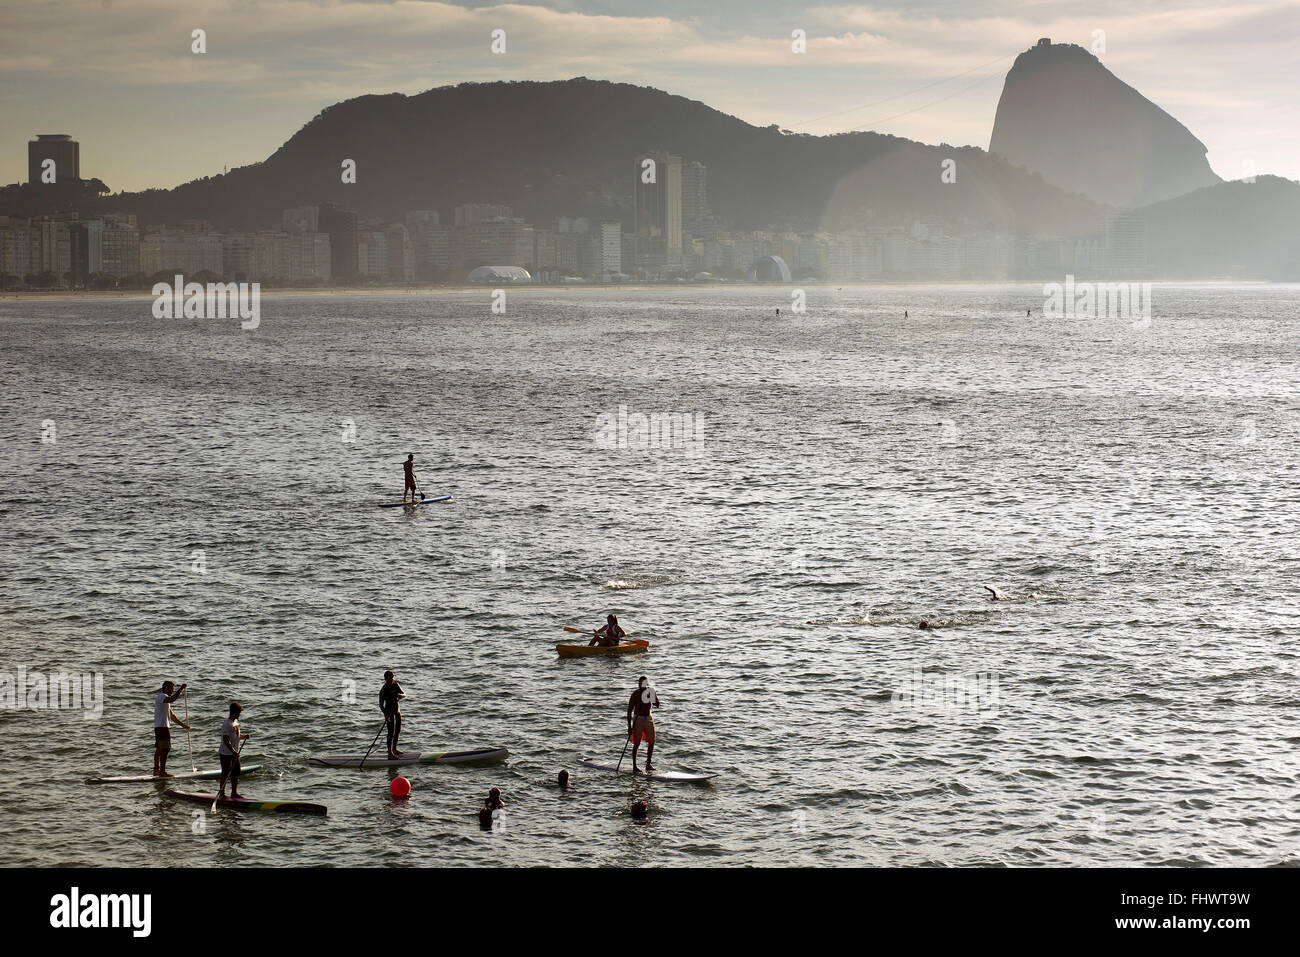 Swimming training and practice of stand up paddle SUP on Copacabana Beach Stock Photo